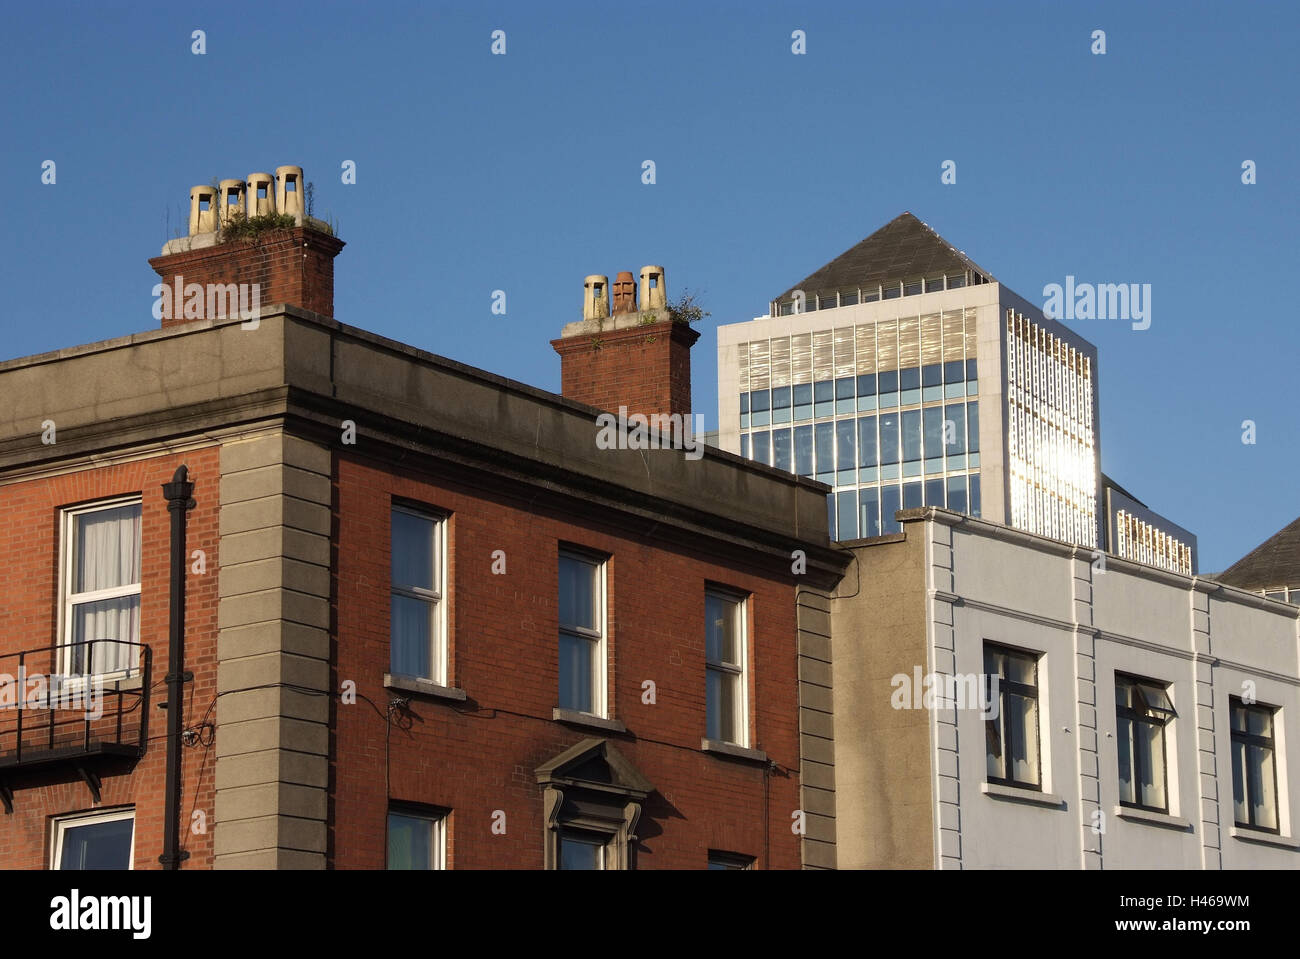 Ireland, Dublin, dock country, houses, old, anew, Stock Photo